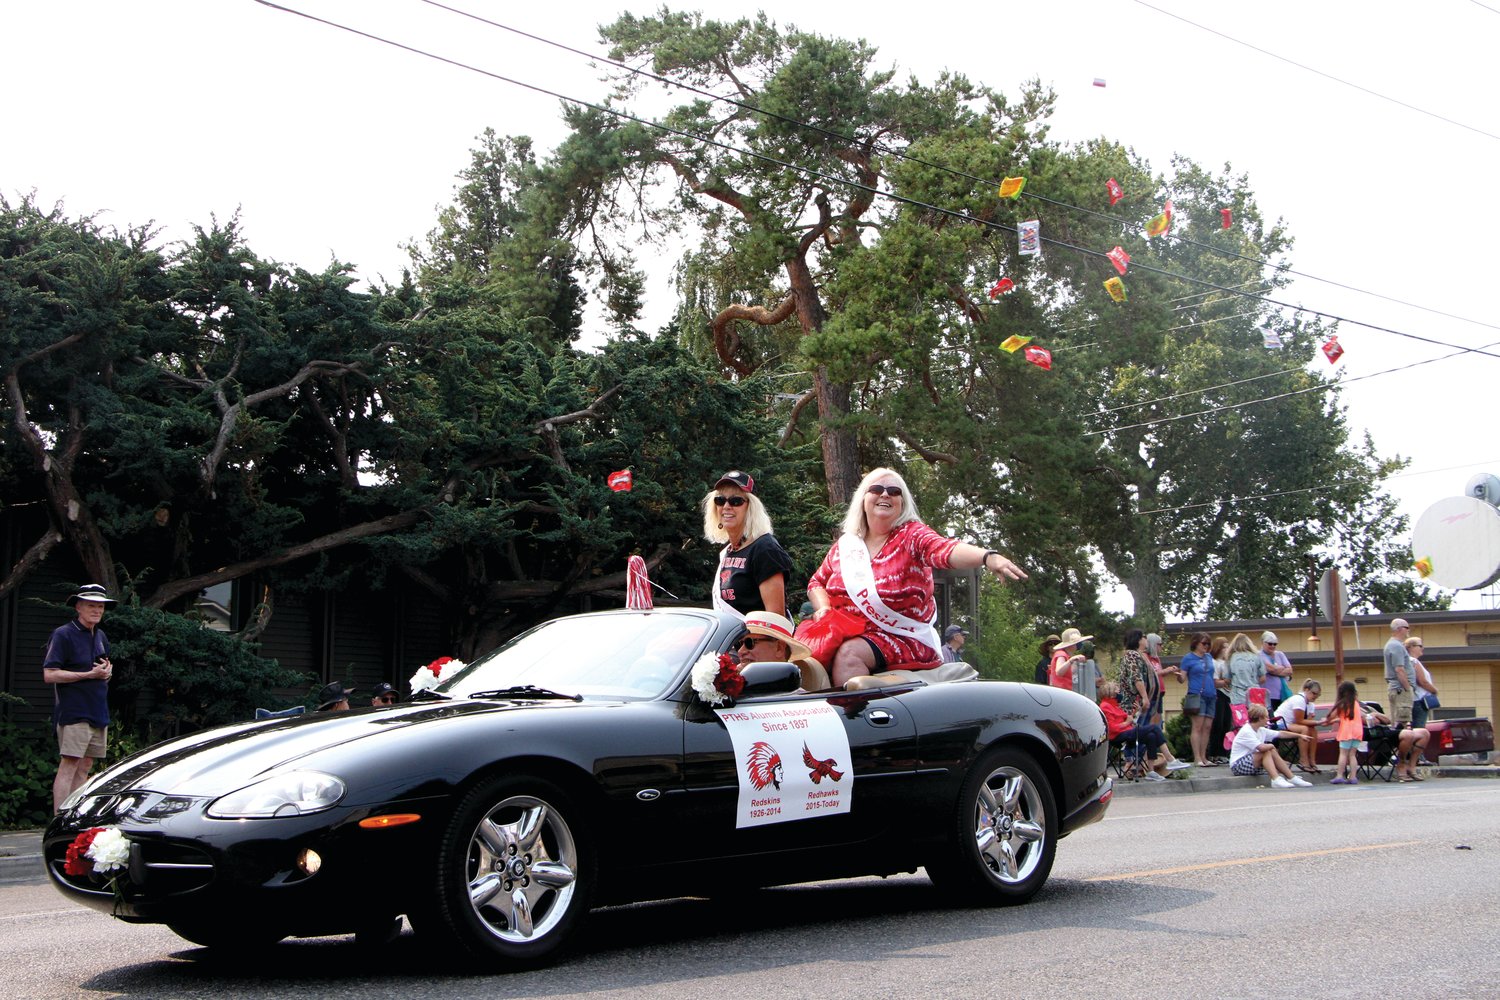 The Rhody Fest parade in 2021 featured plenty of eager enthusiasts, but this year’s Grand Parade is expected to see the beloved promenade return to its usual glory.